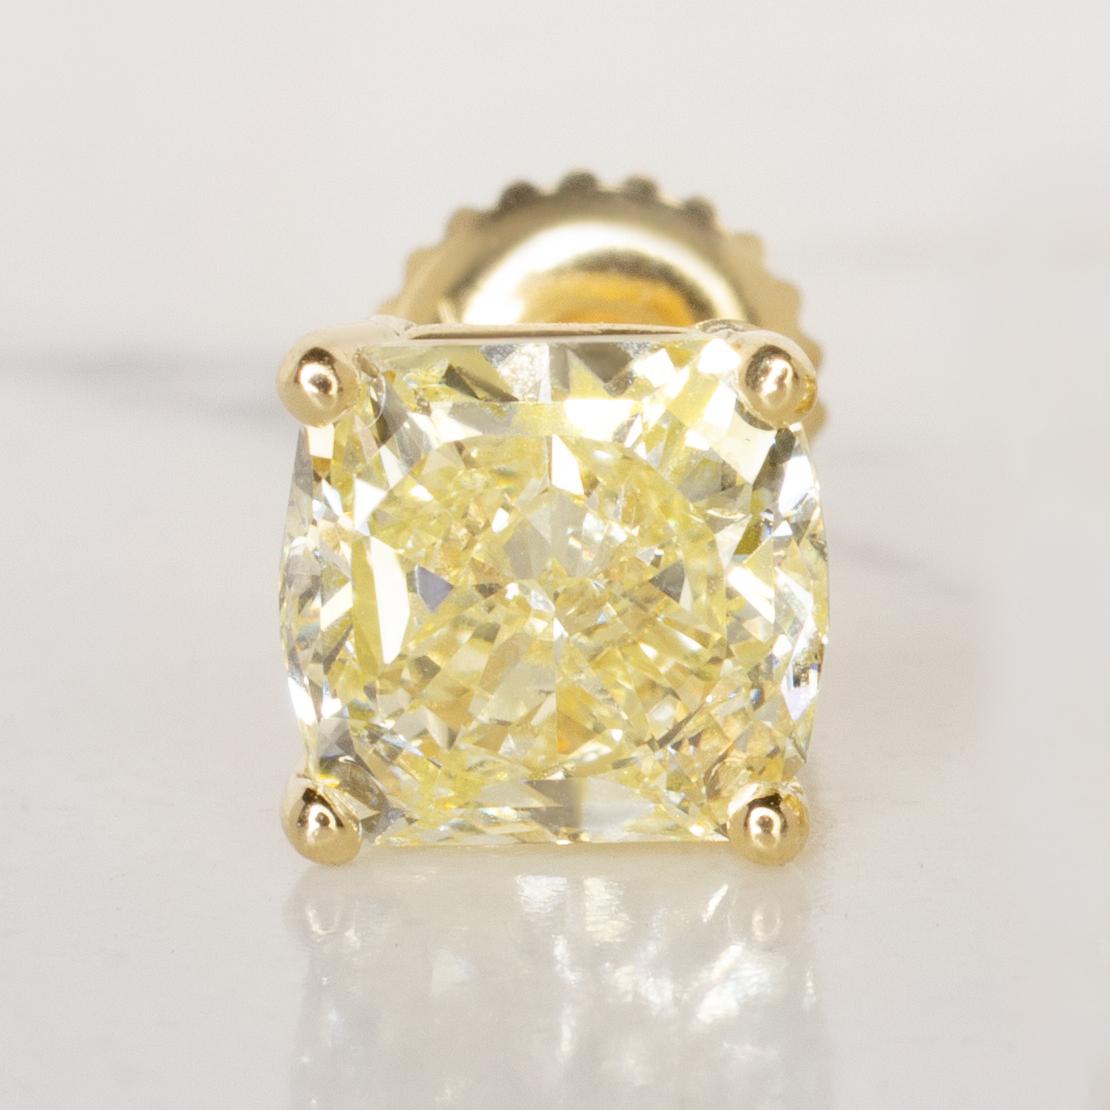 These are GIA Certified 2 Carat cushion cut fancy yellow, internally flawless diamond stud earrings set in yellow gold. 

Cushion cut diamonds blend the energy of a round brilliant with the symmetry of a radiant cut, a combination that maximizes the